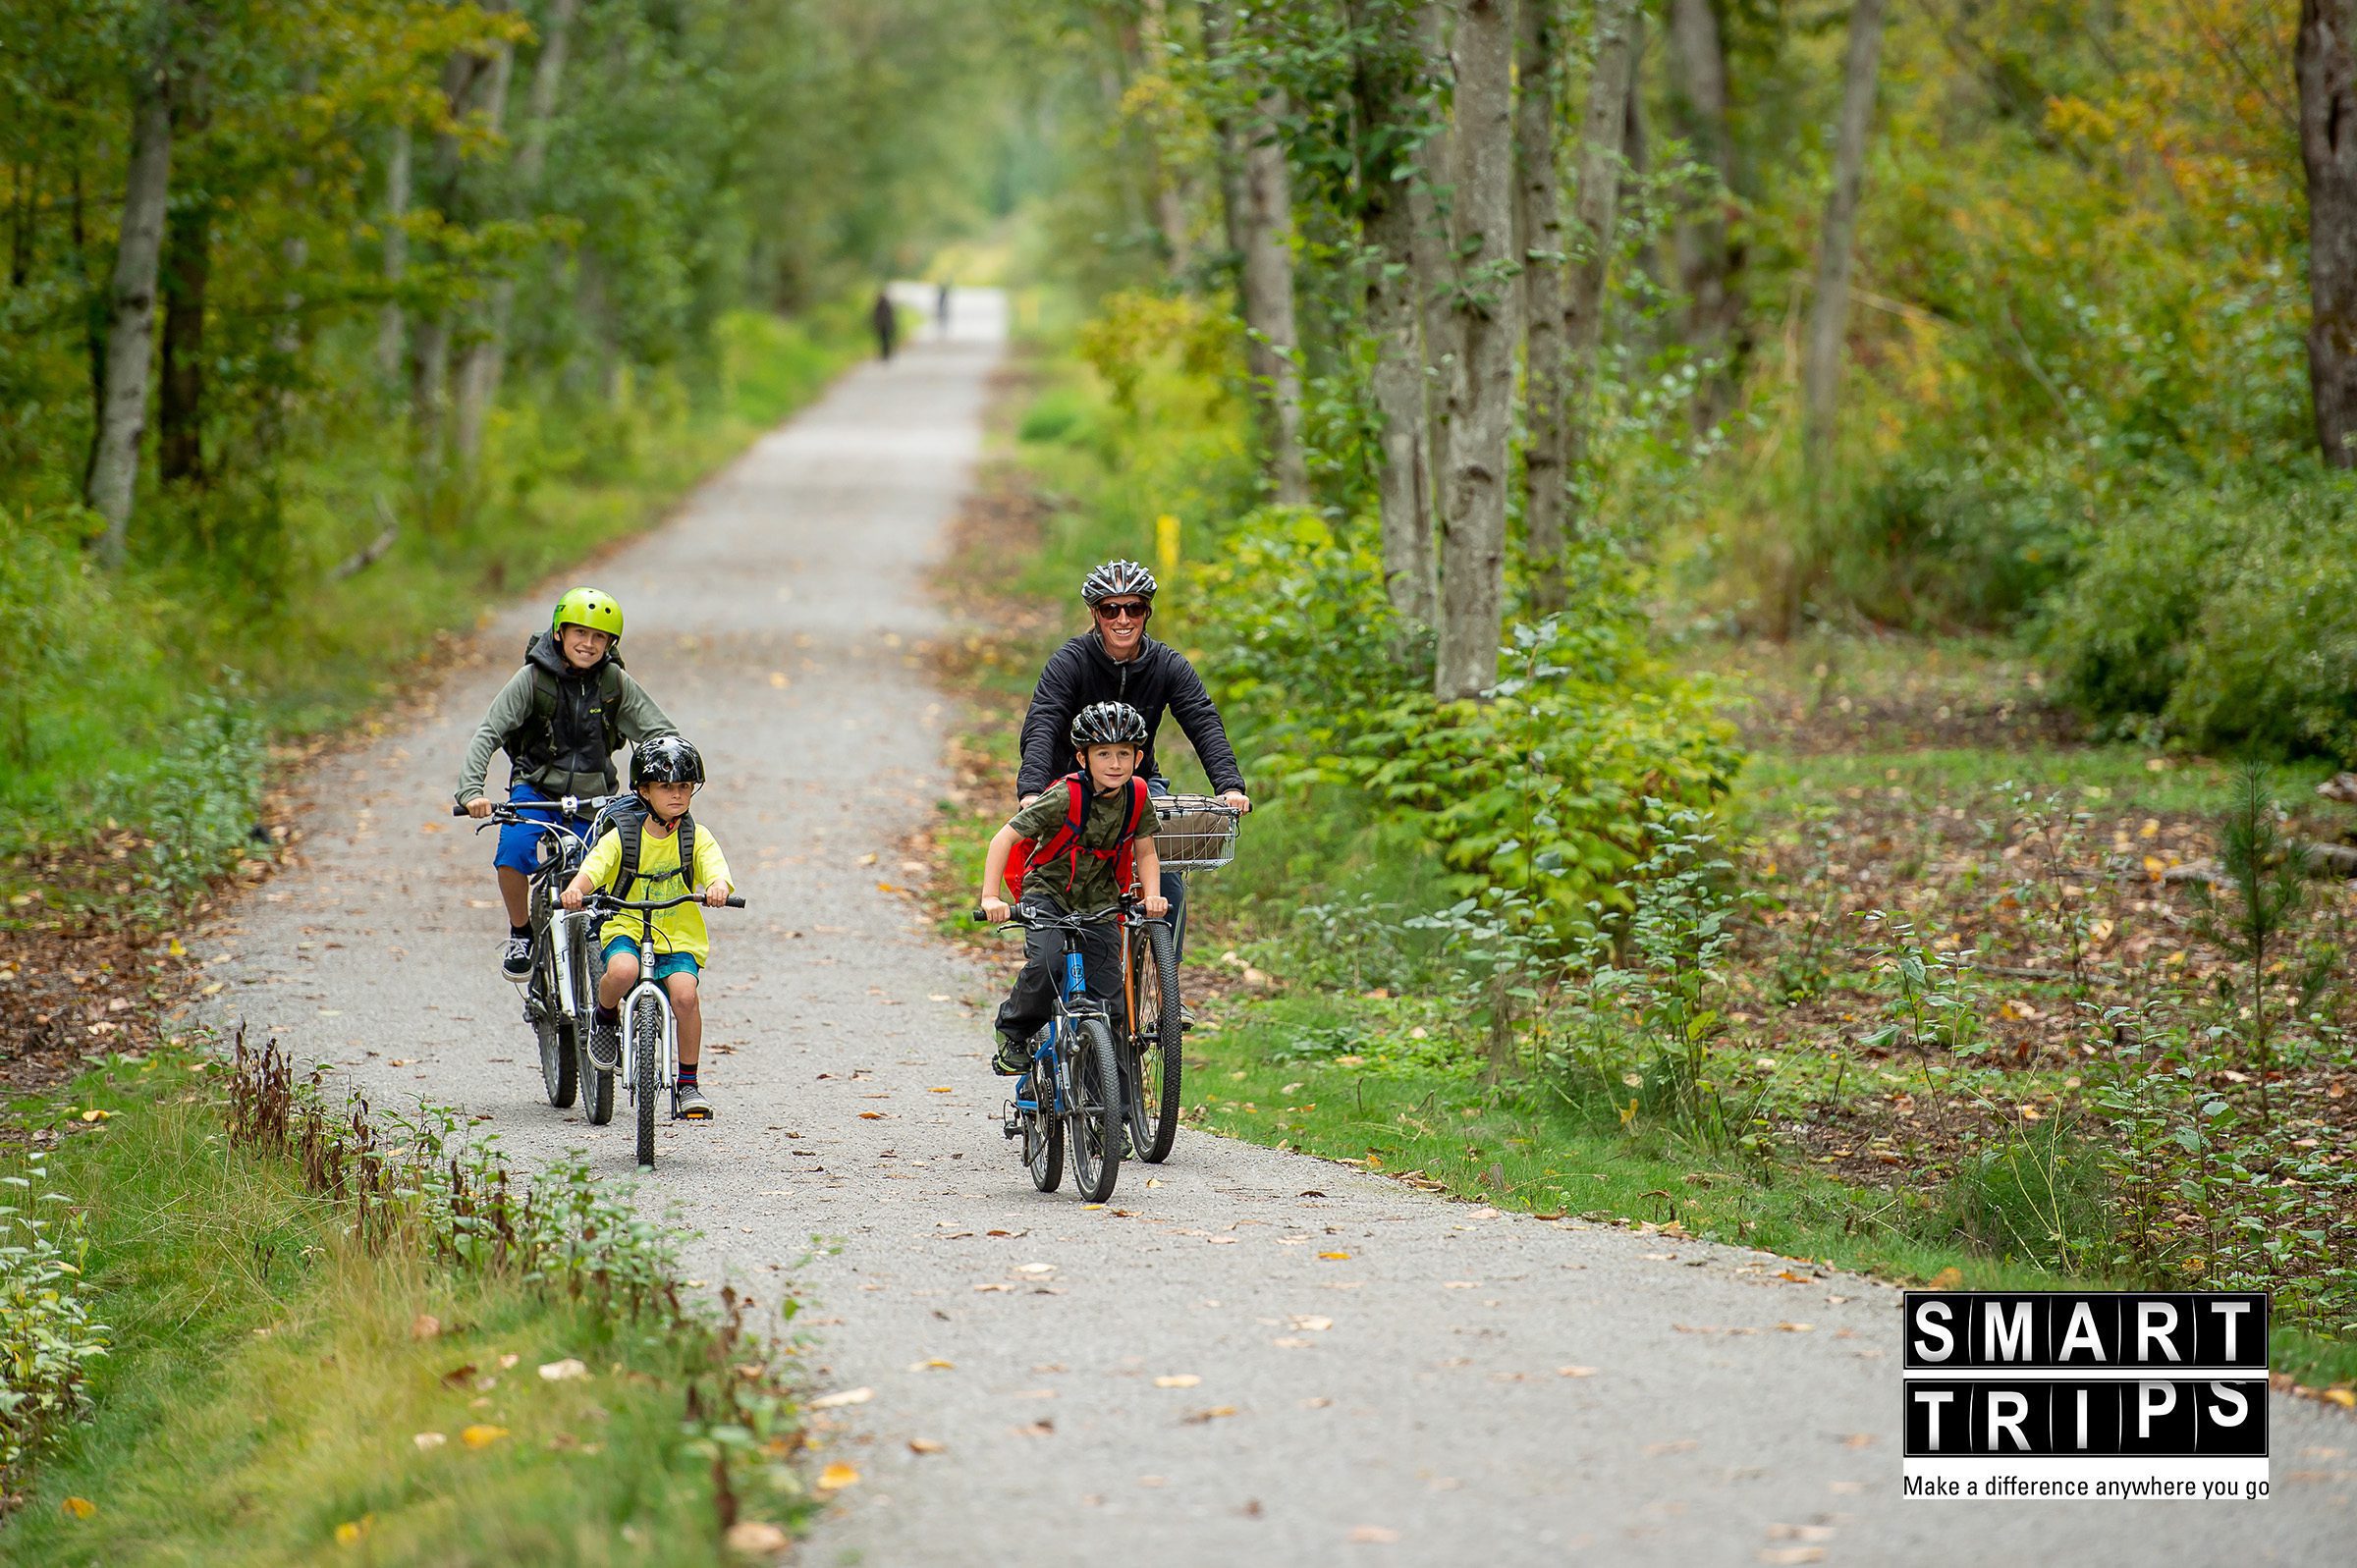 Adult man and three children biking together on a forested trail.